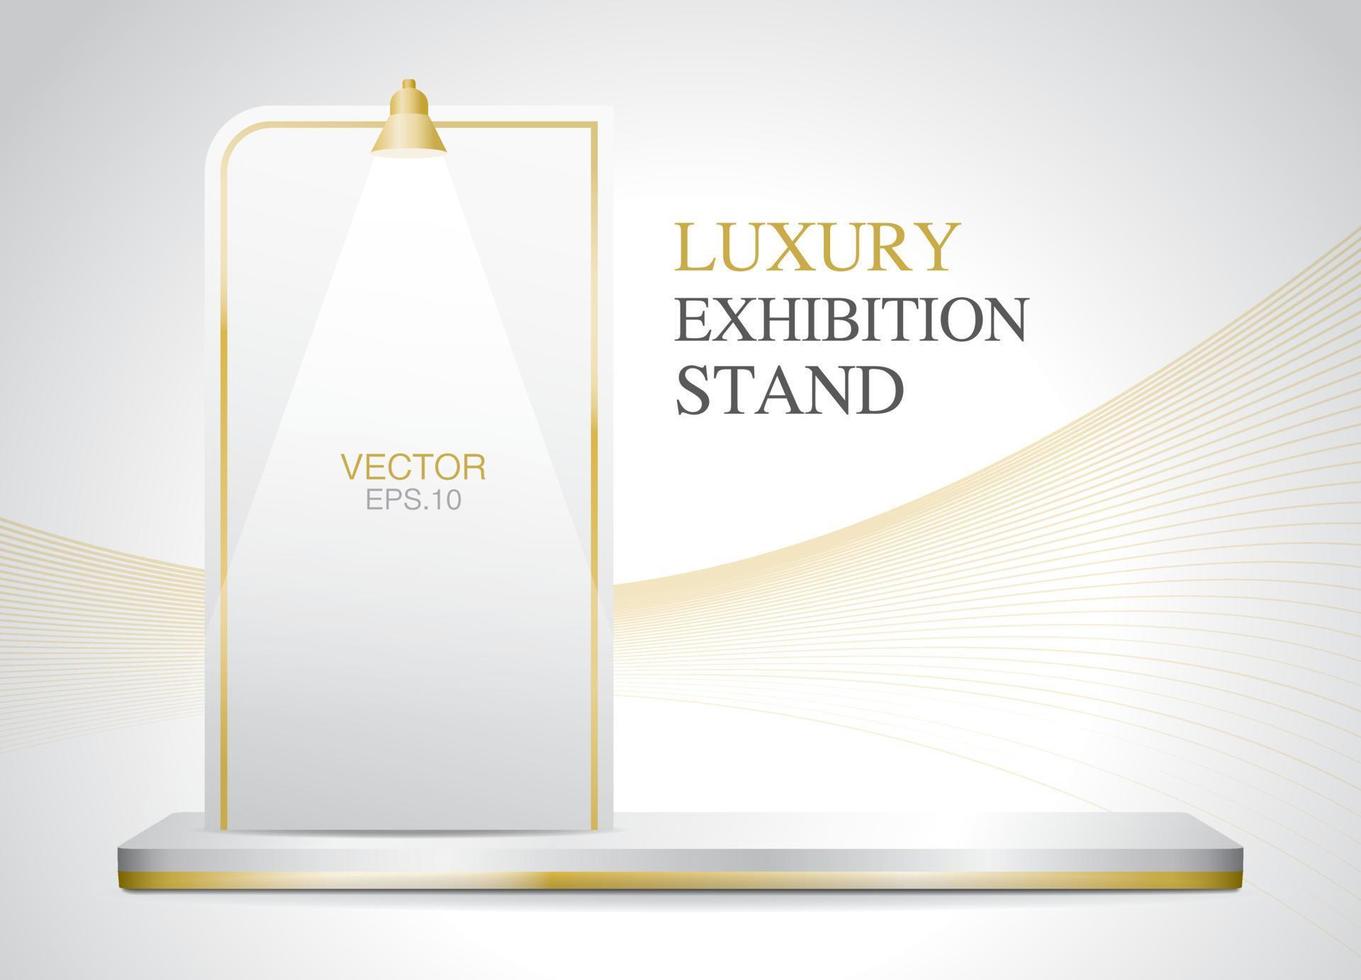 Empty luxury long product stage with exhibition board 3d illustration vector for putting your object in white and golden color theme.